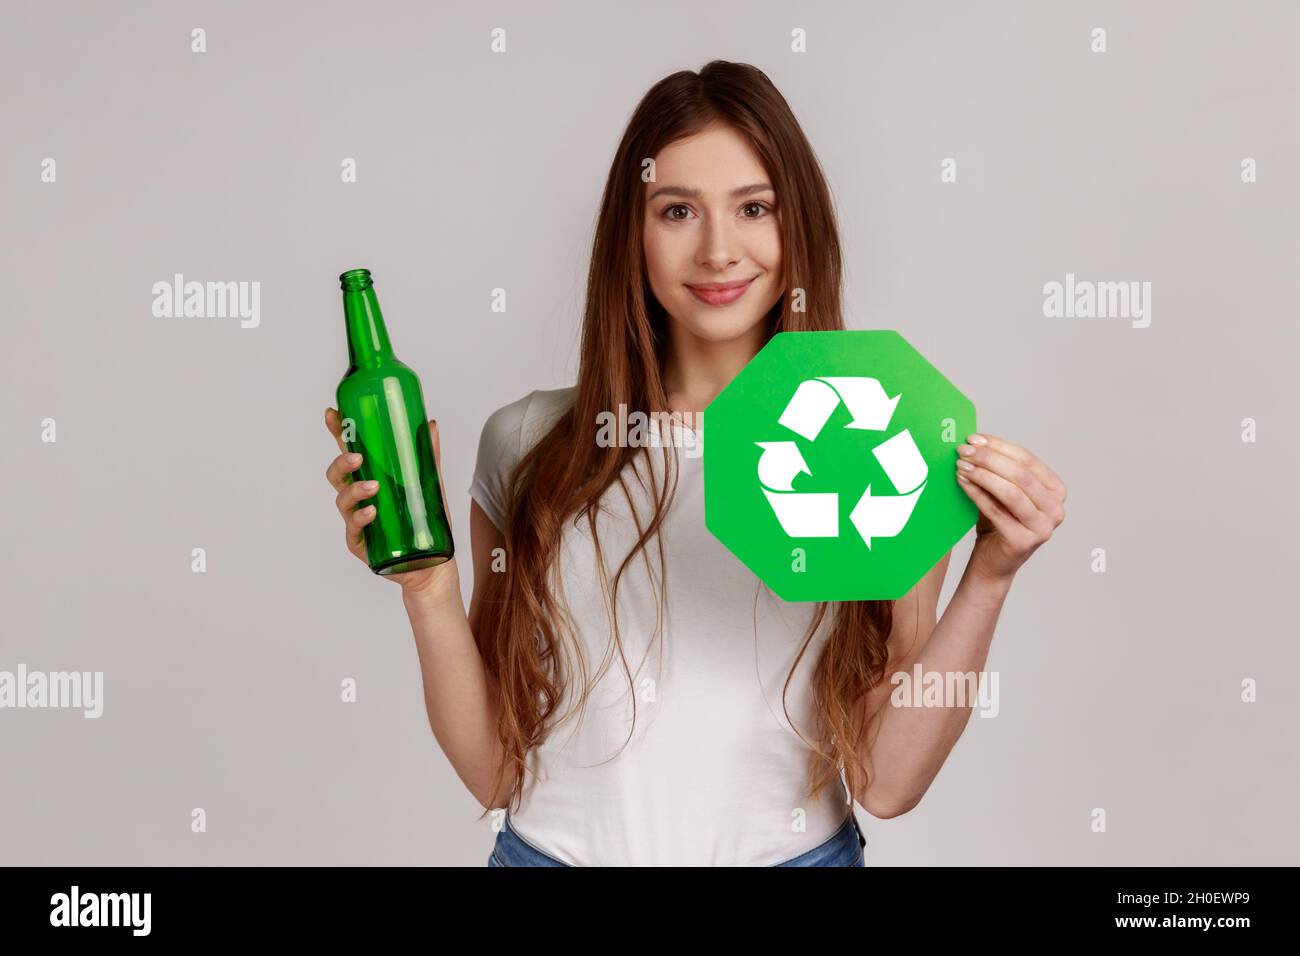 Woman holding glass bottle and green recycling sign, garbage sorting and environment protection, wearing white casual style T-shirt. Indoor studio shot isolated on gray background. Stock Photo